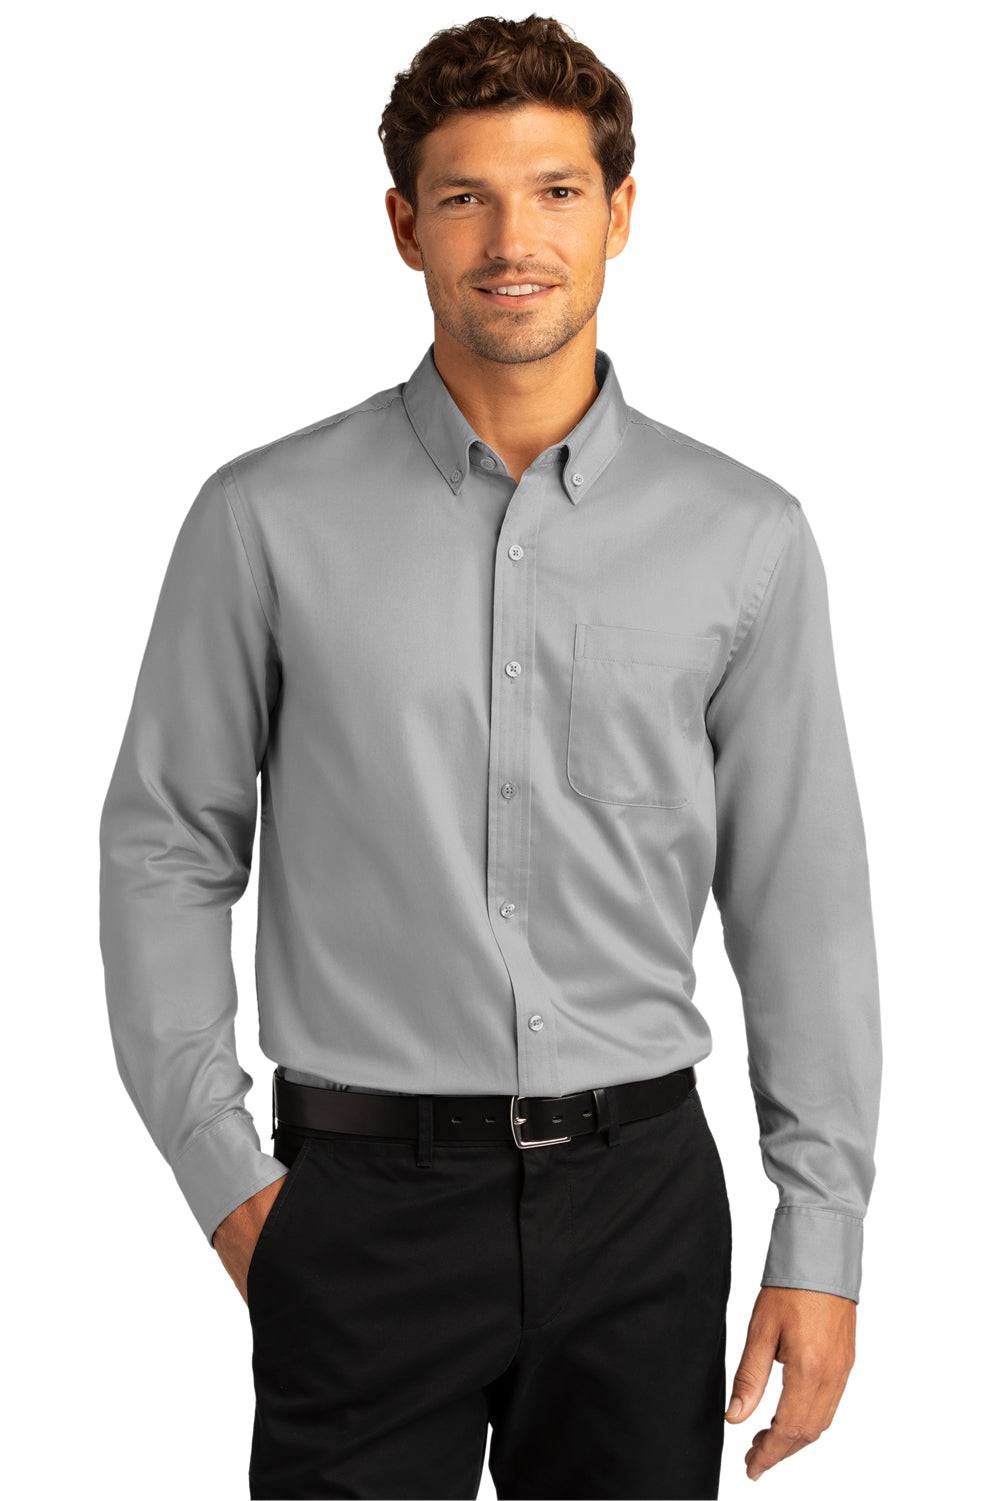 Port Authority Mens SuperPro Wrinkle Resistant React Long Sleeve Button Down Shirt w/ Pocket Gusty Grey Front